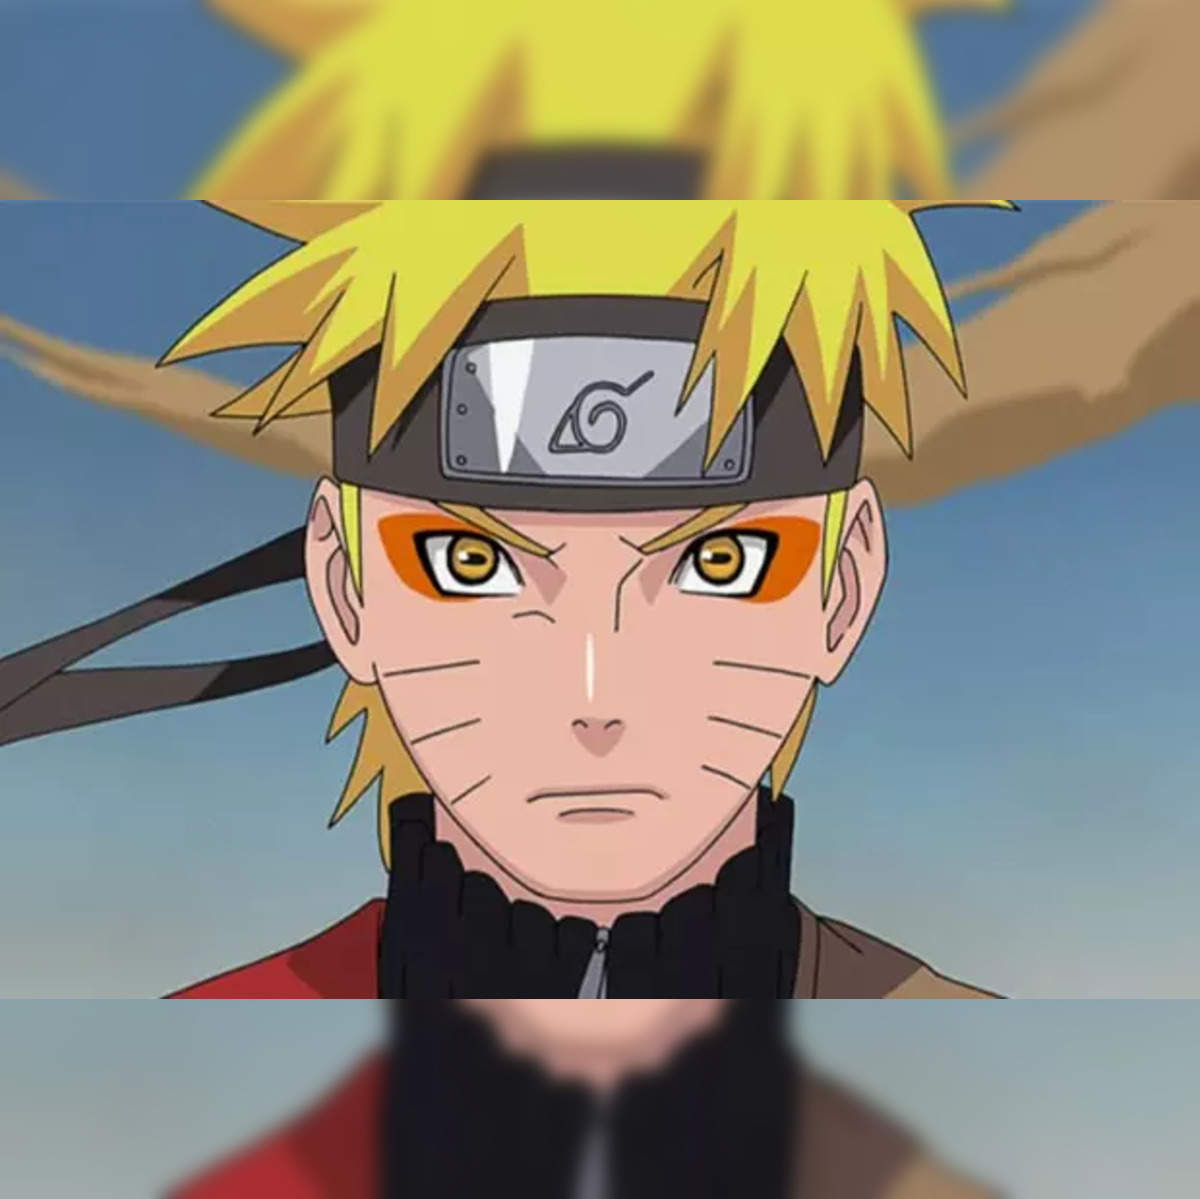 All Naruto Movies in Order (A Complete Guide)